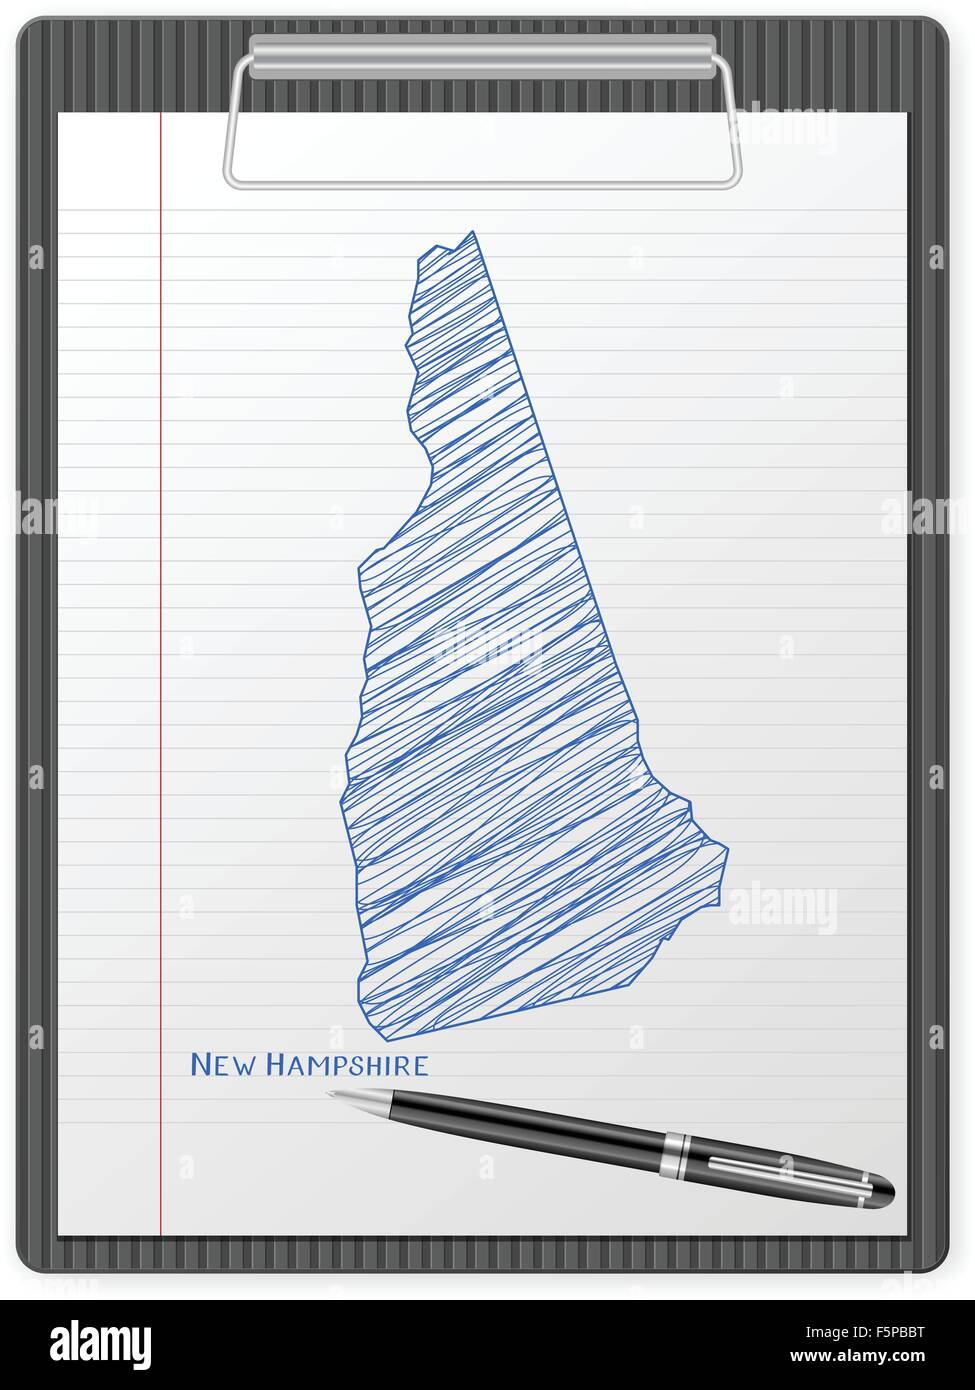 Clipboard with drawing New Hampshire map. Vector illustration. Stock Vector